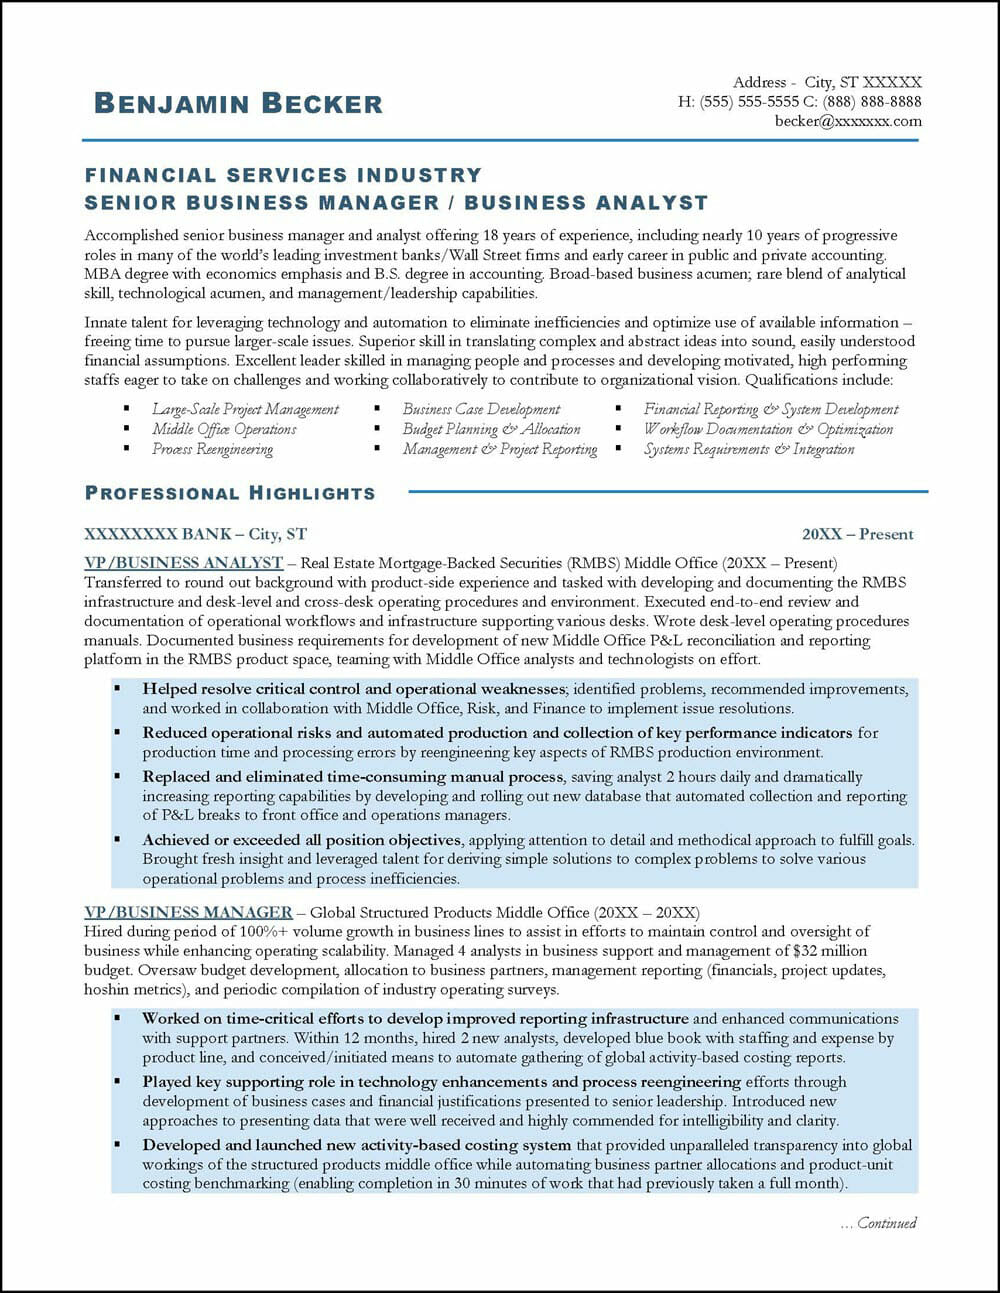 Business Analyst Resume Distinctive Career Services